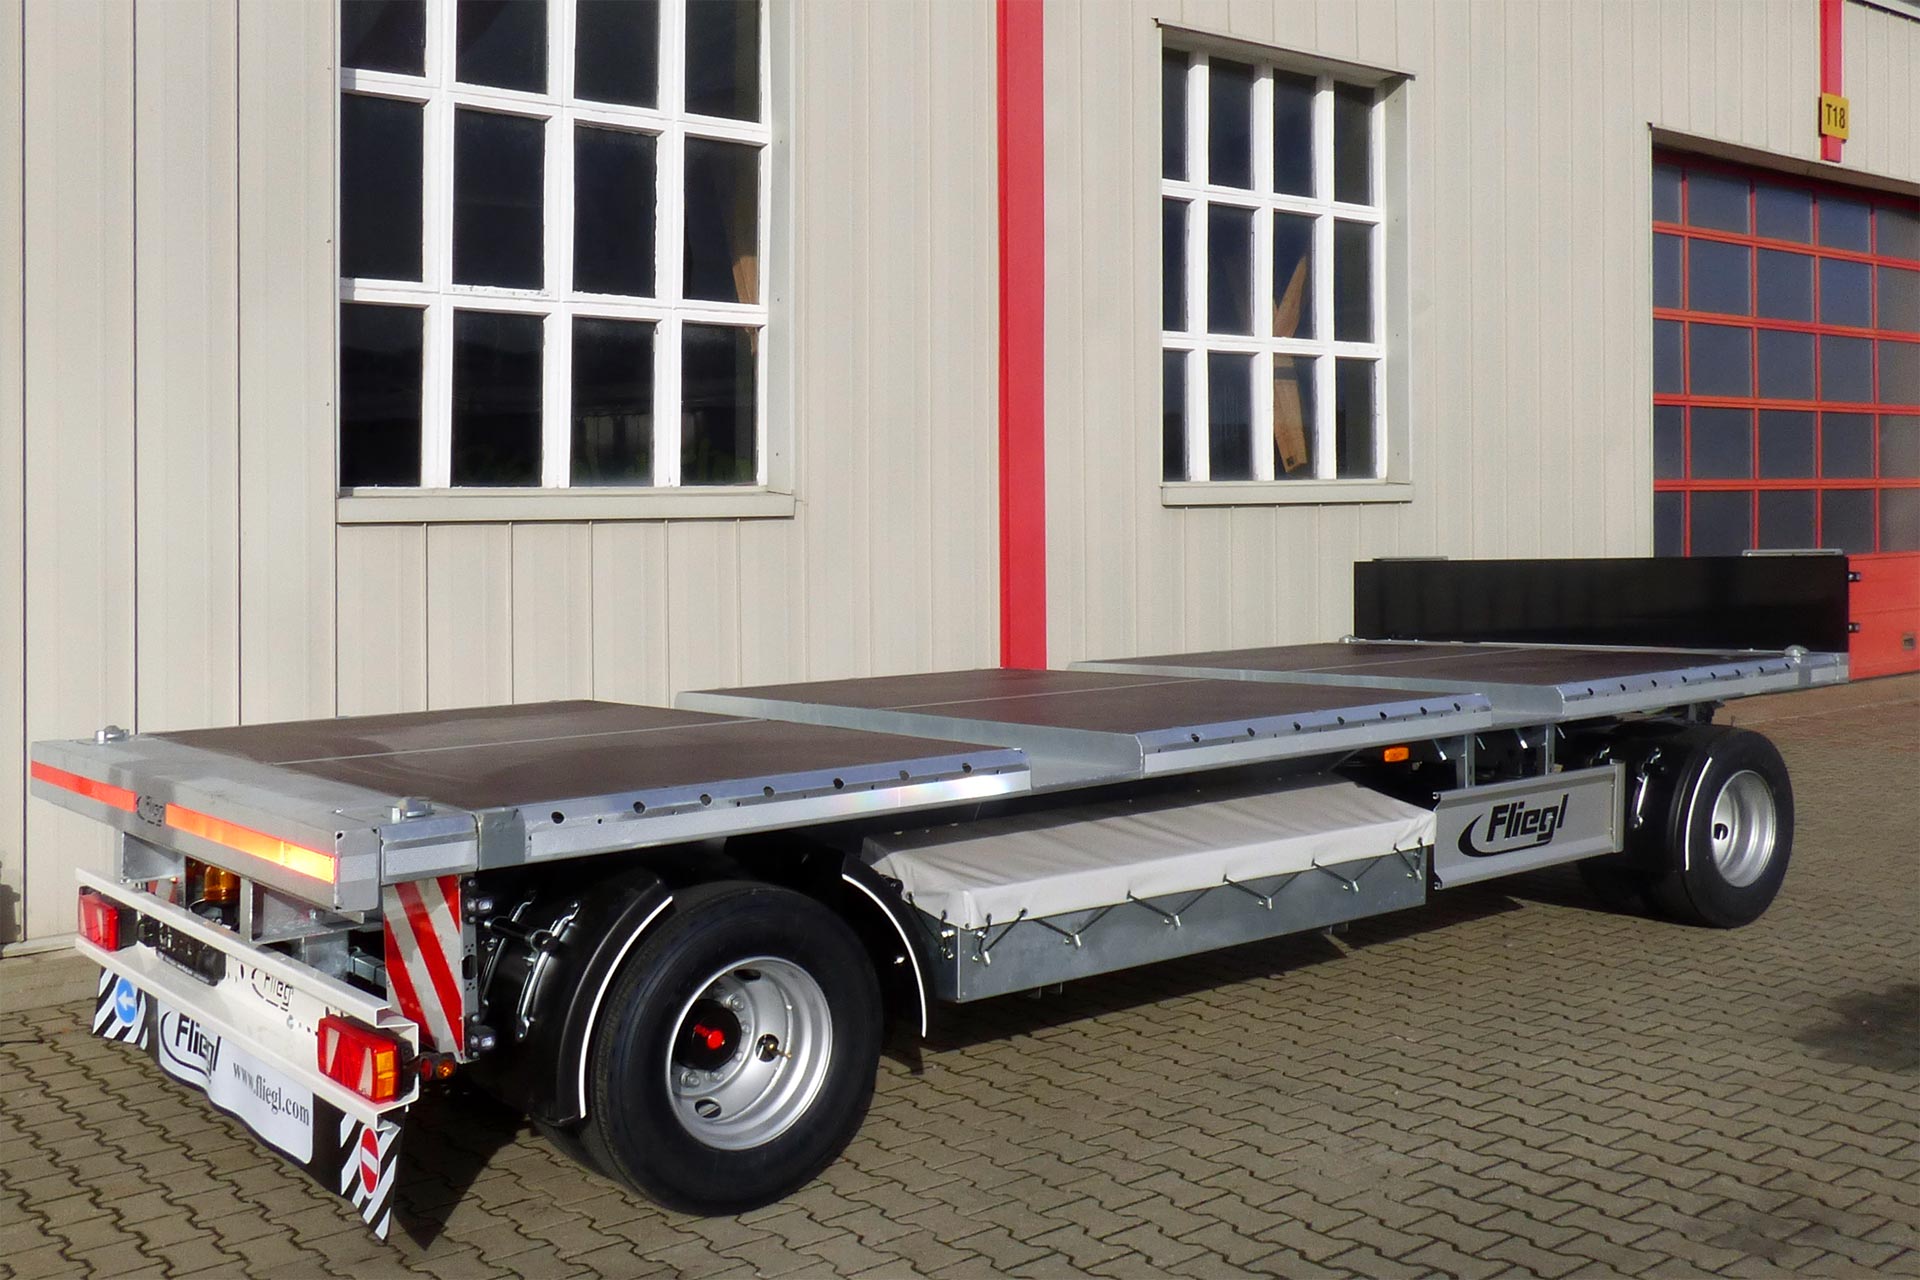 Two Axle Platform Trailer Zps Fliegl, How Thick Should A Trailer Floor Be